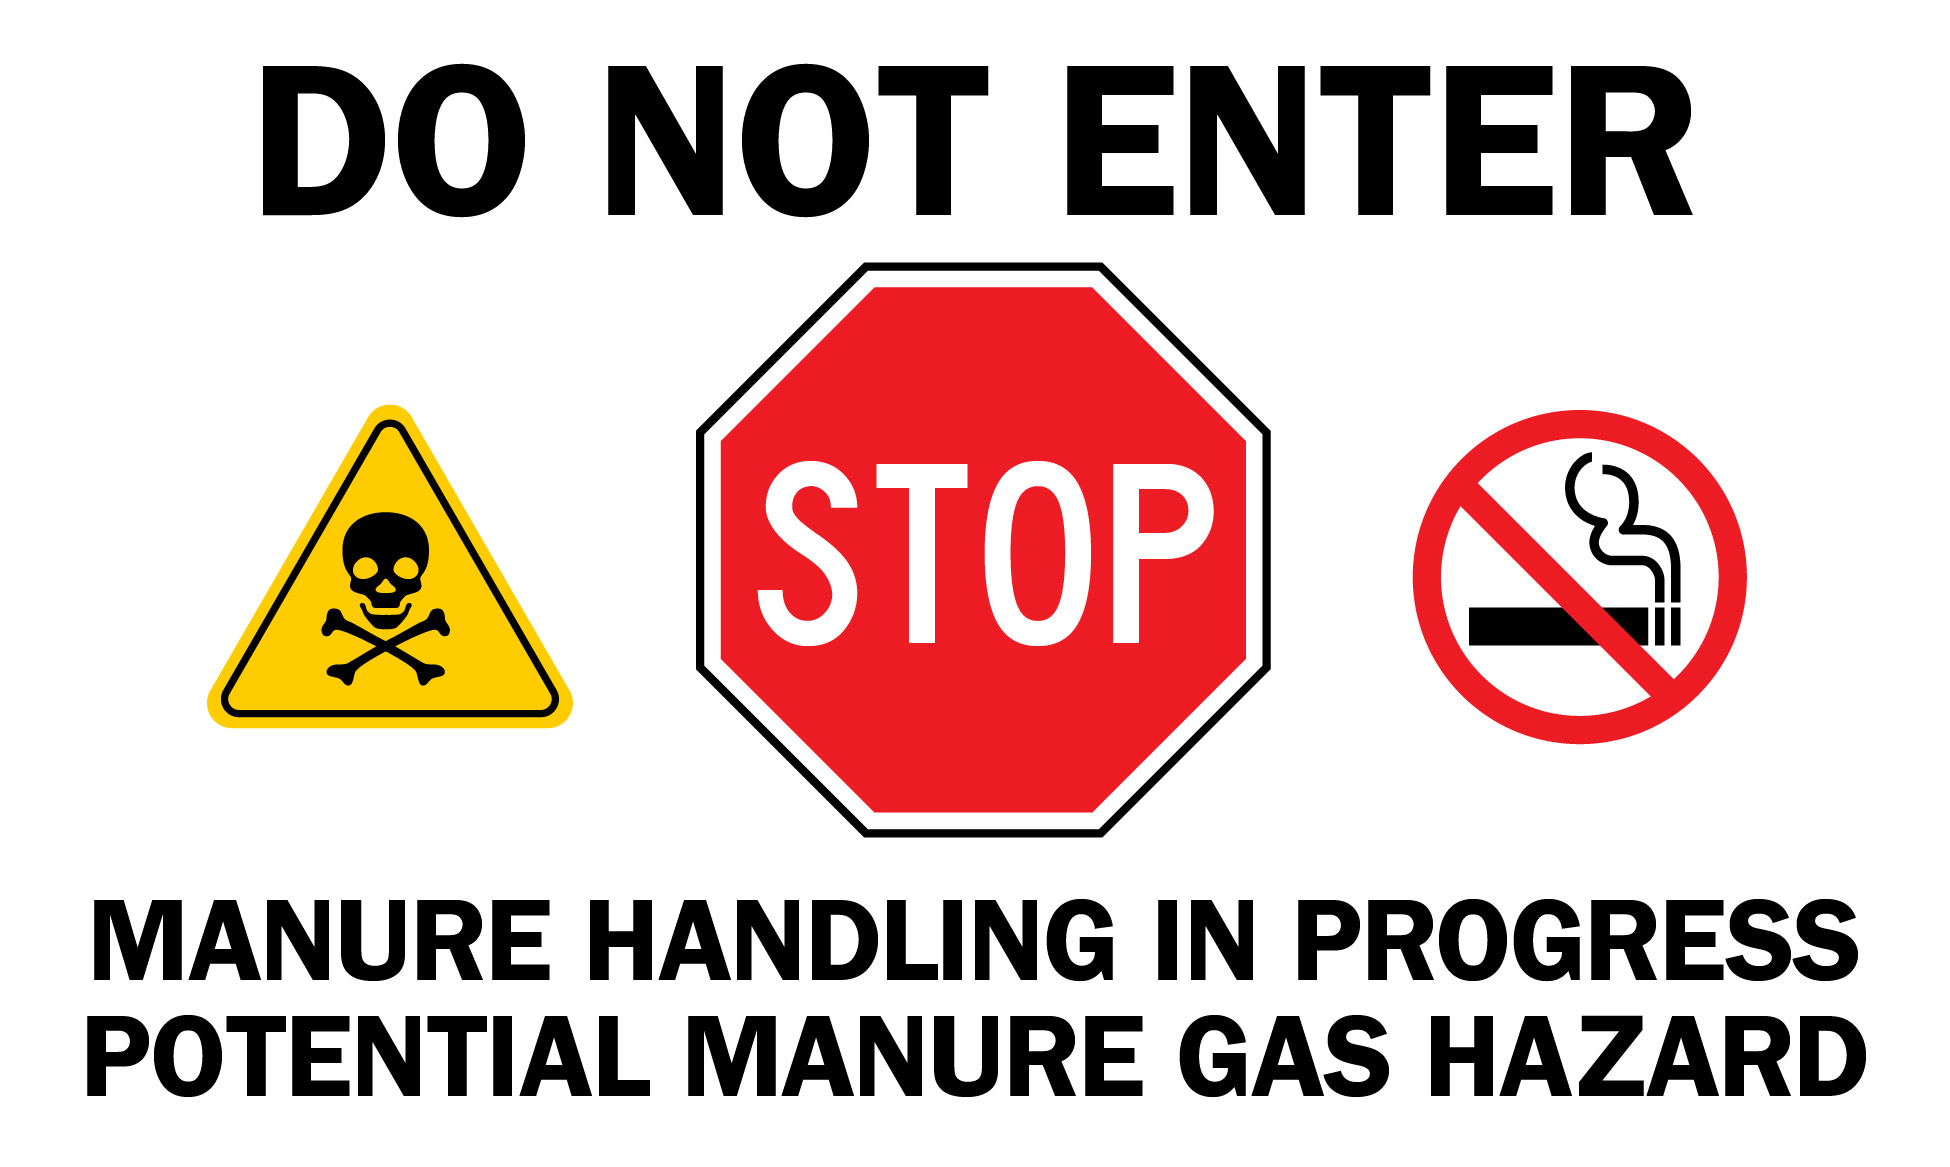 A warning sign that says Do Not Enter and warns of hazardous gases